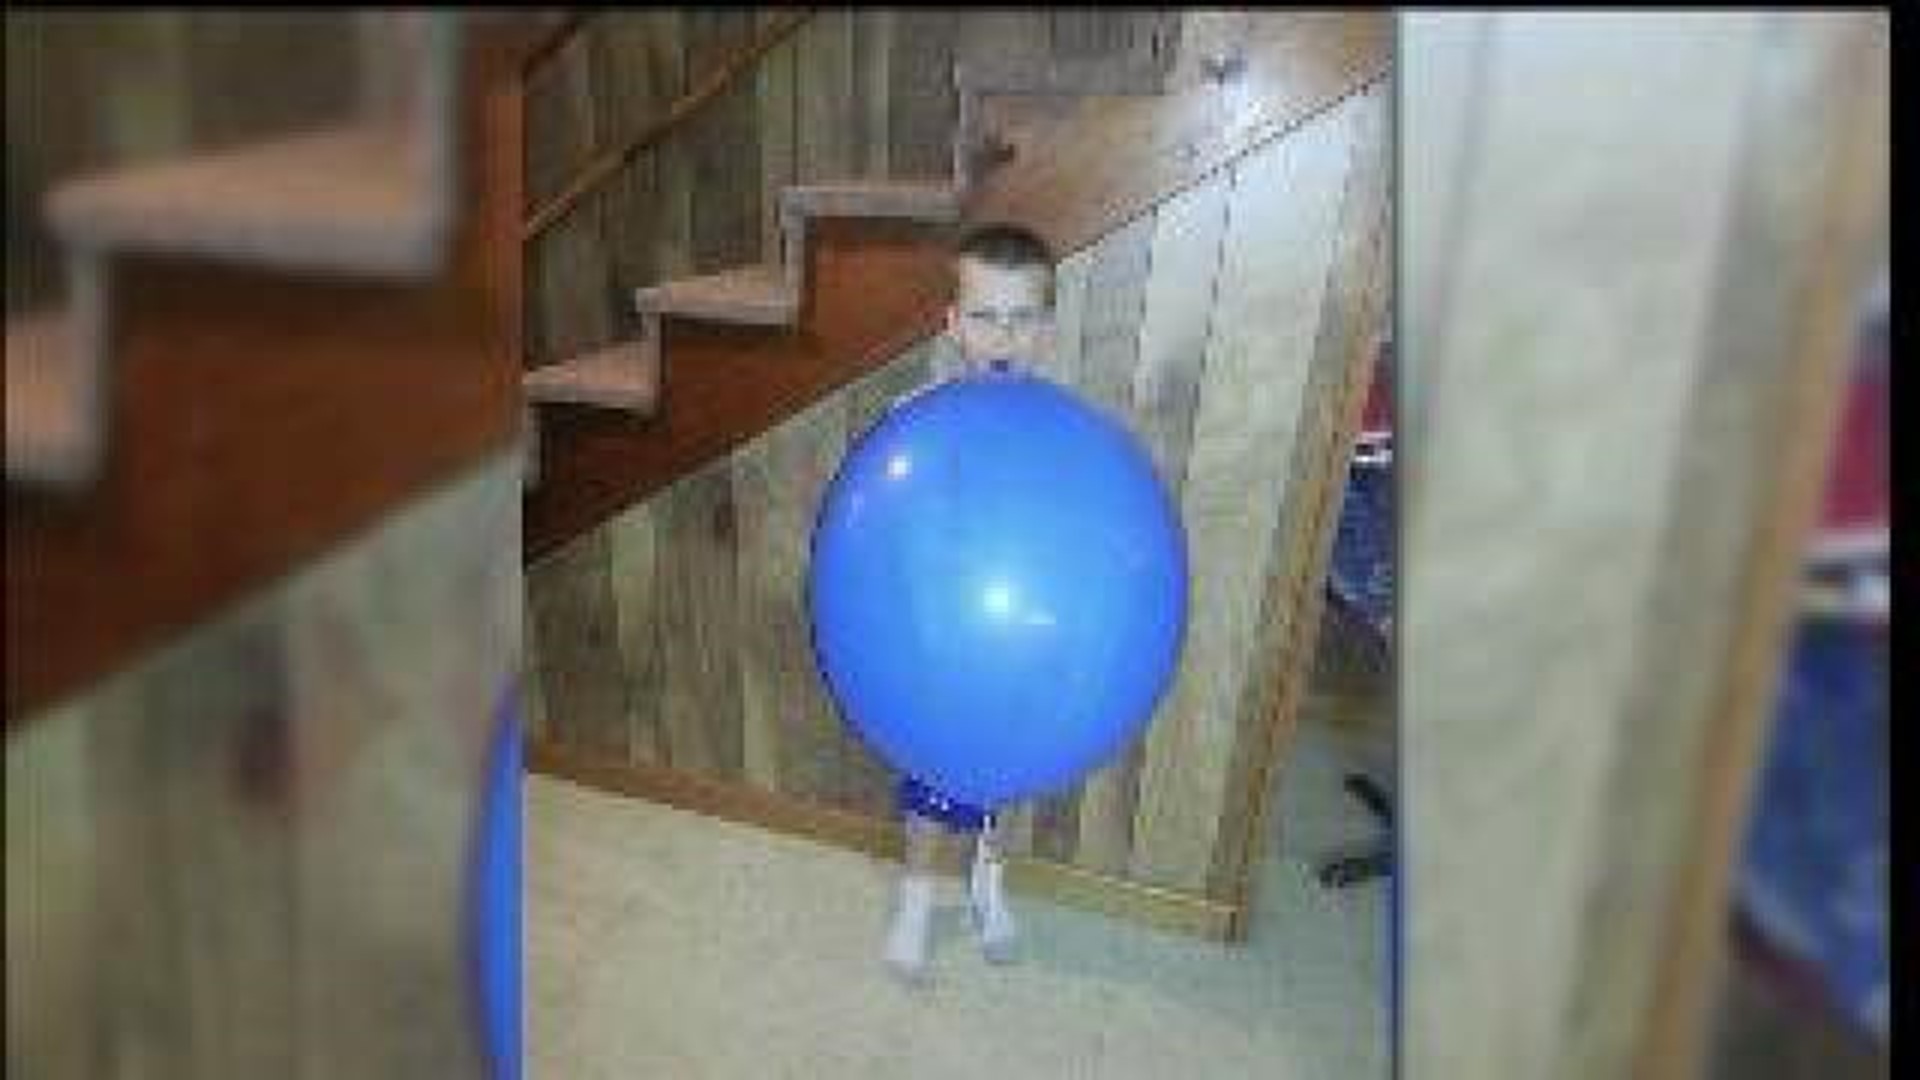 Community Prays for Local Boy after Traumatic Incident